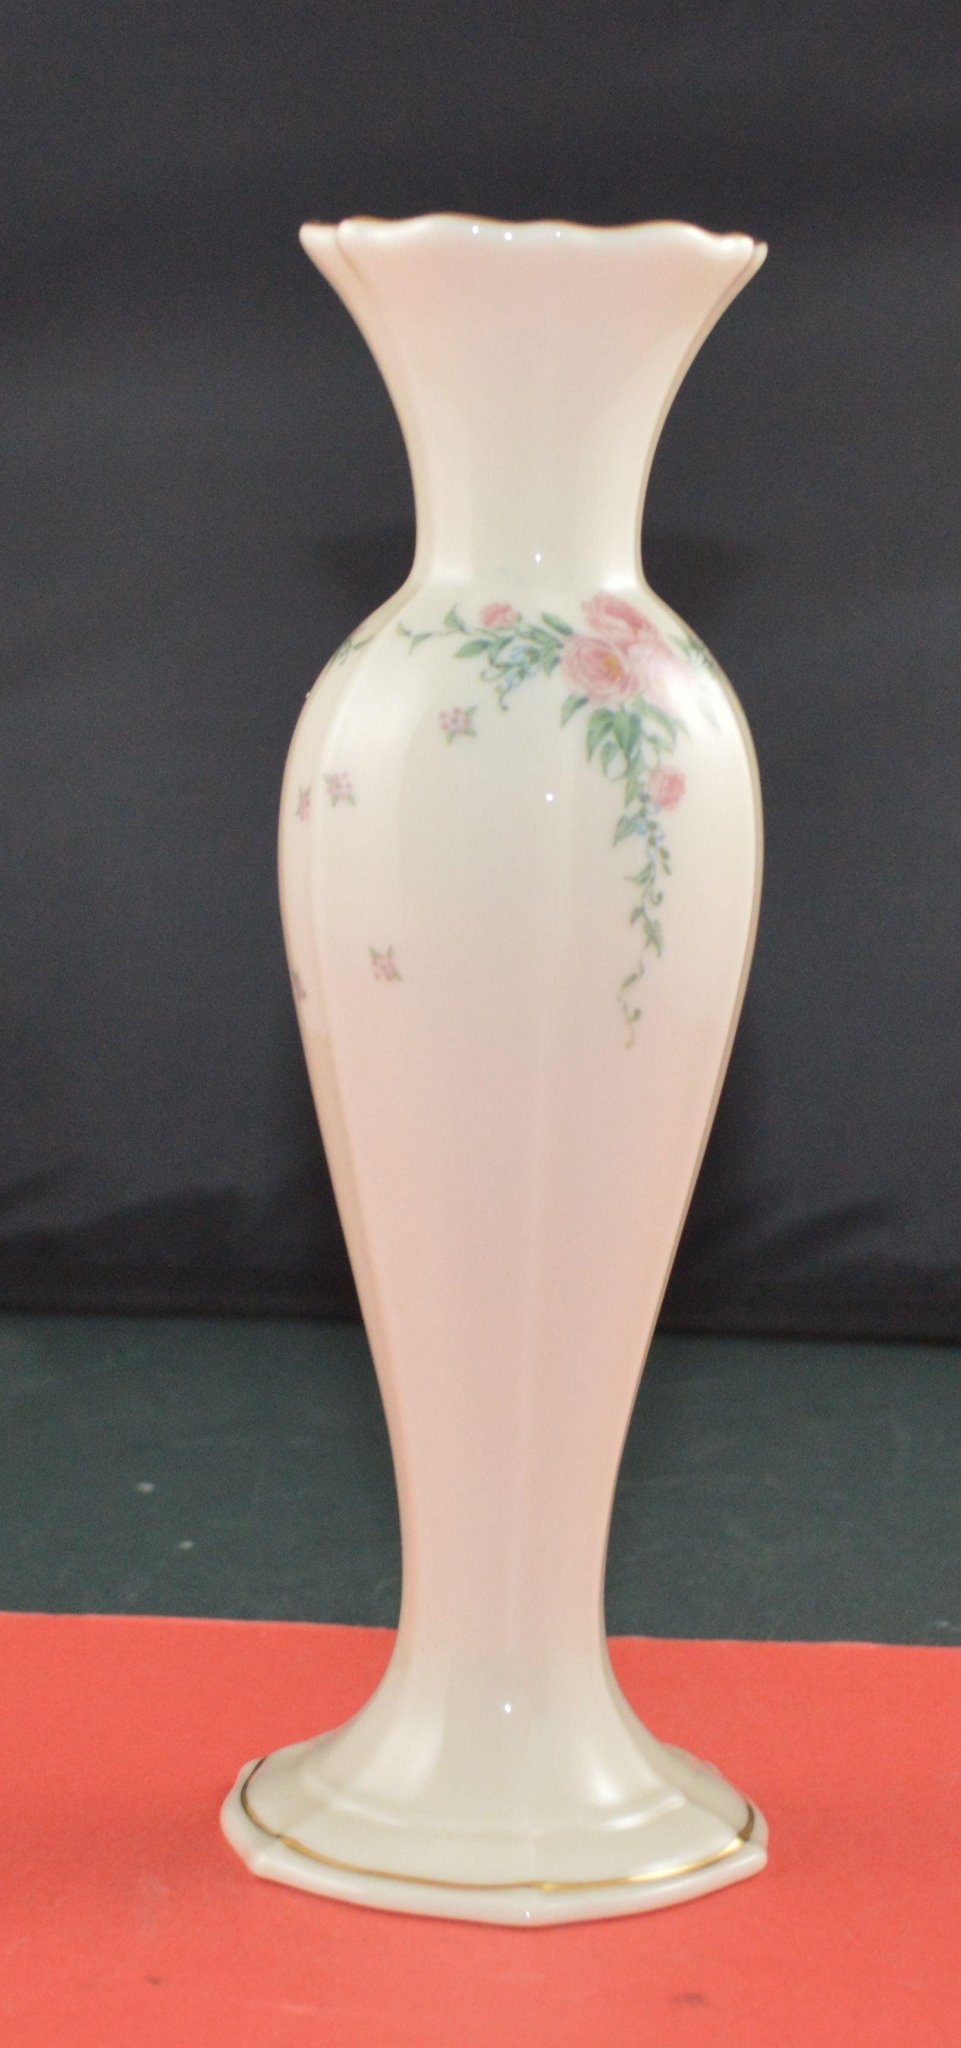 LENOX VASE(PREVIOUSLY OWNED) GOOD CONDITION - TMD167207